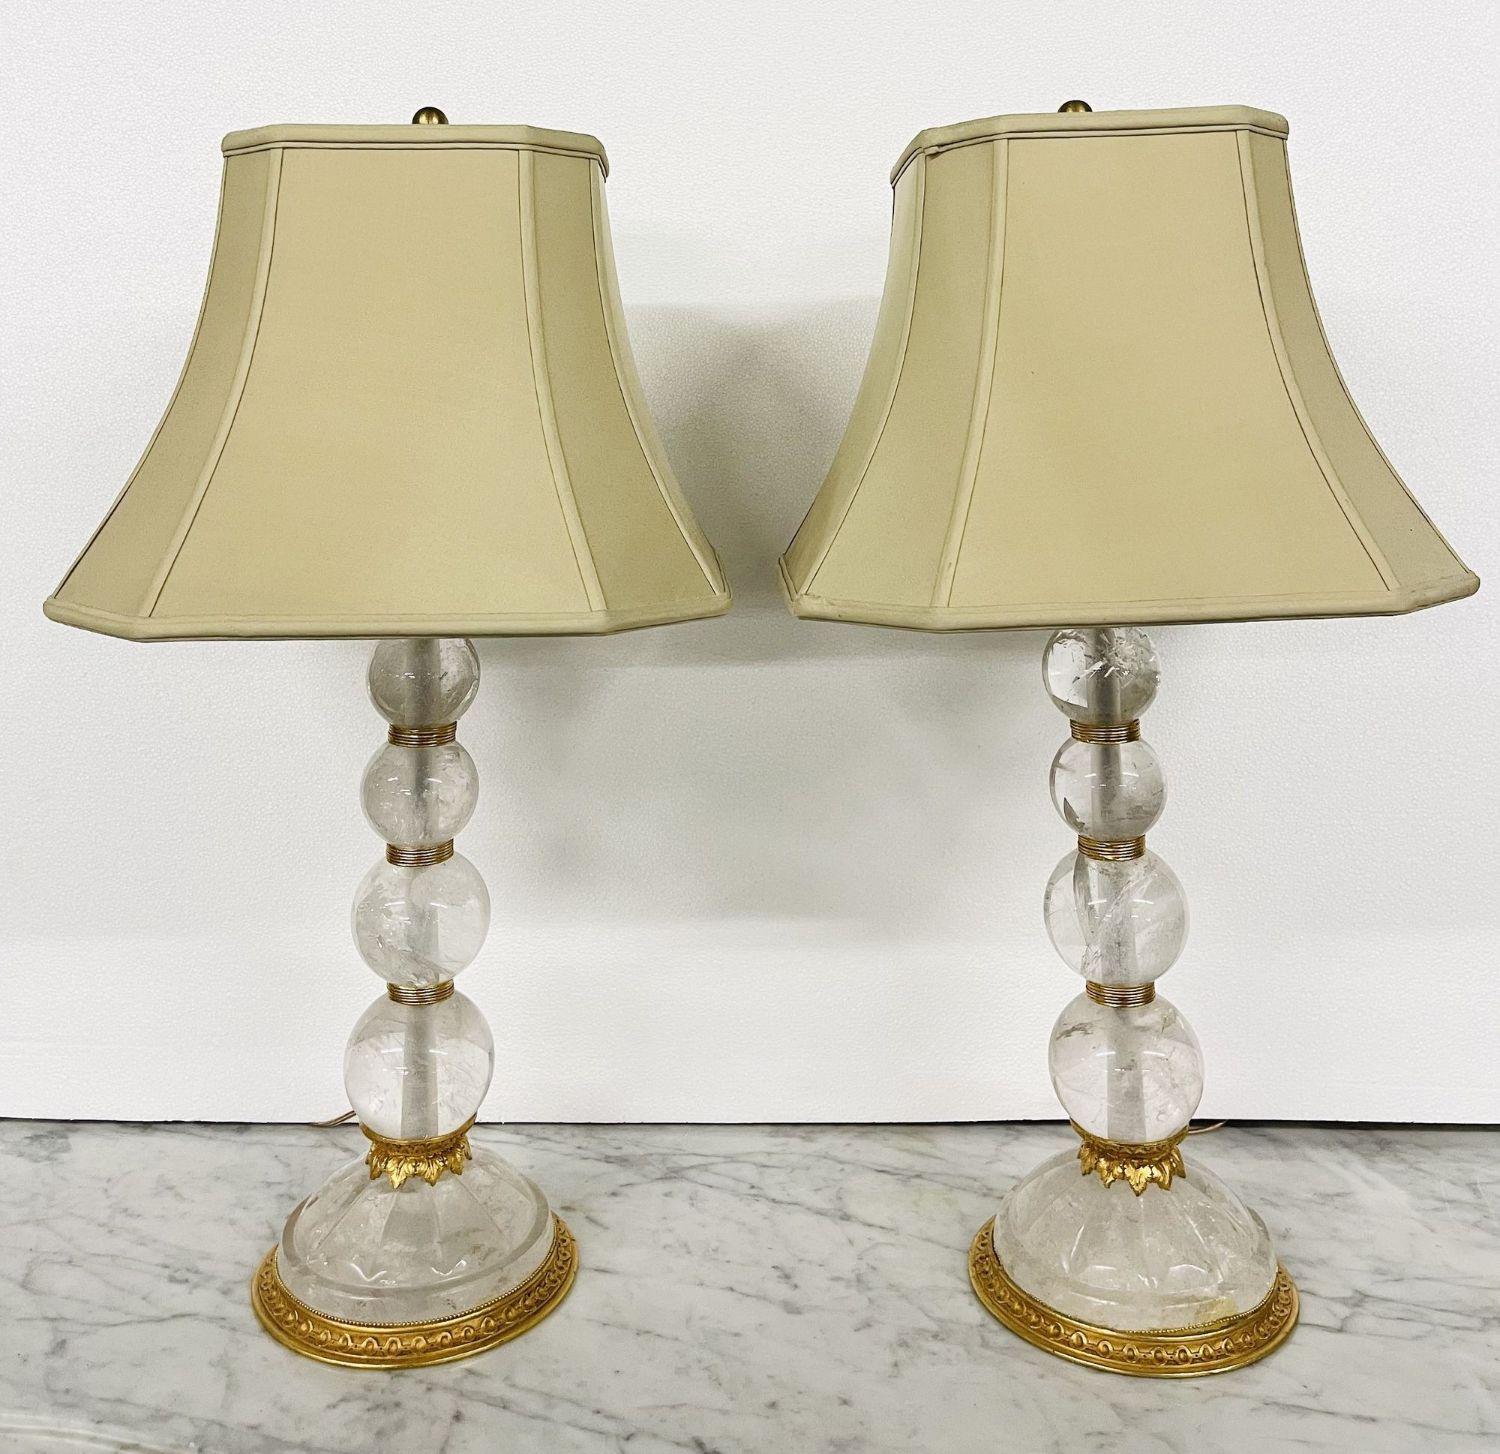 Pair of Baques Rock Crystal Table Lamps, 19th/20th Century For Sale 2